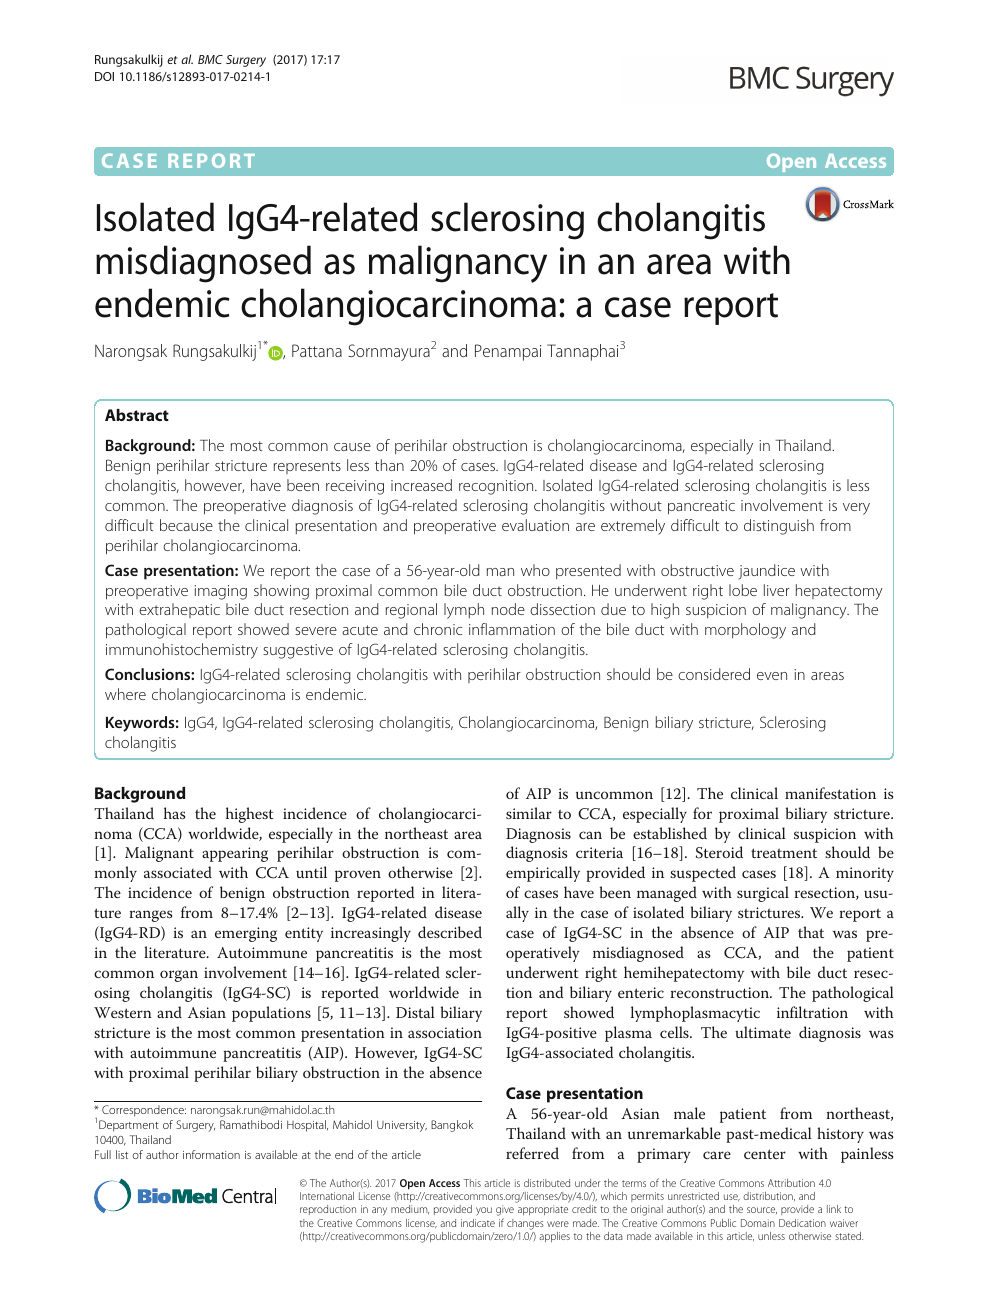 Isolated IgG4-related sclerosing cholangitis misdiagnosed as malignancy an area with endemic cholangiocarcinoma: a case report – of research paper Clinical medicine. Download scholarly article PDF and read for free